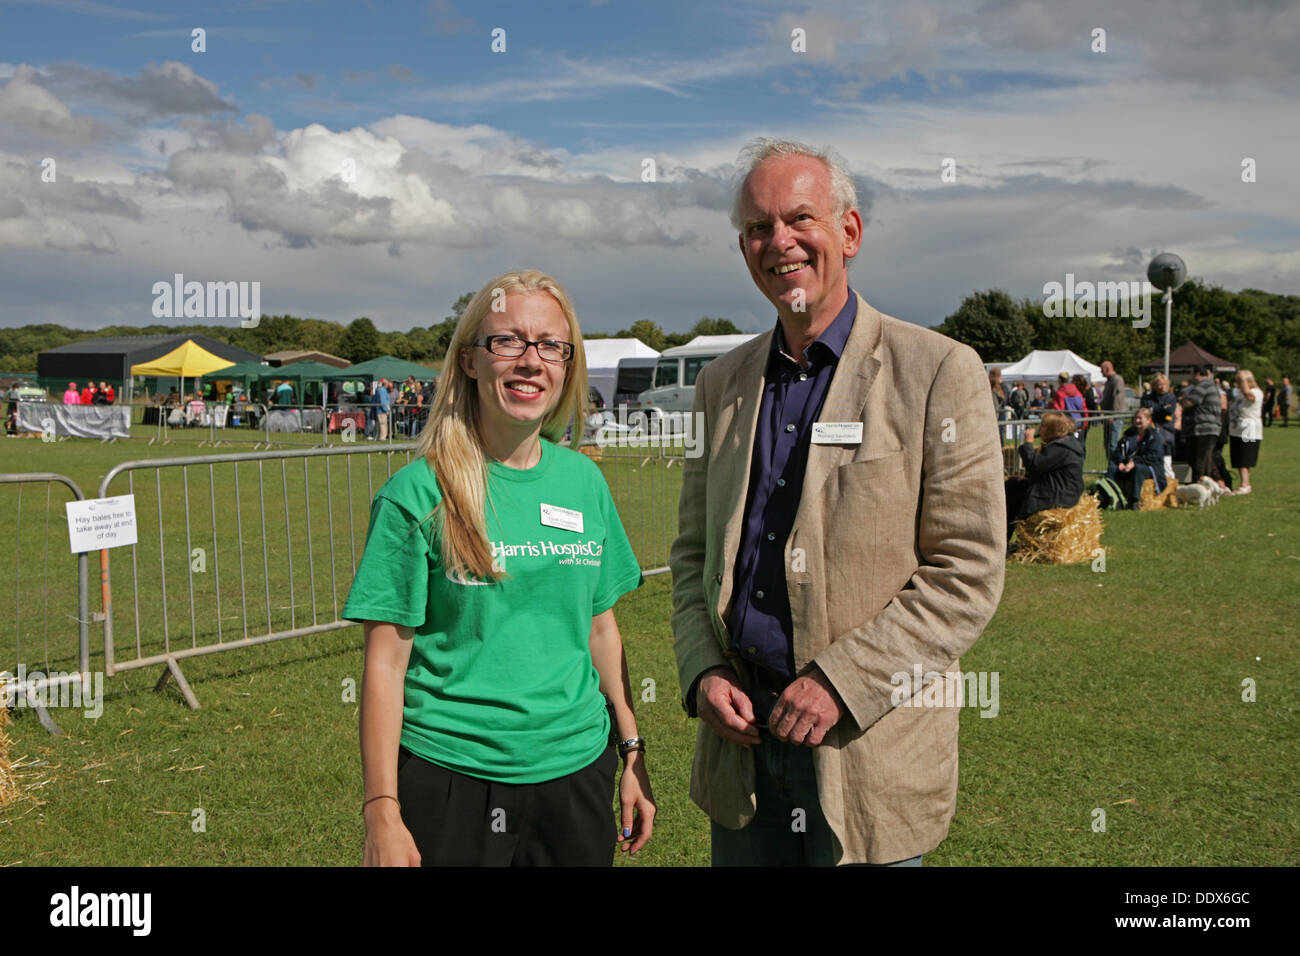 Orpington,UK,8th September 2013,A Trustee and fundraiser at the Harris Hospiscare Classic Car sho Credit: Keith Larby/Alamy Live News Stock Photo